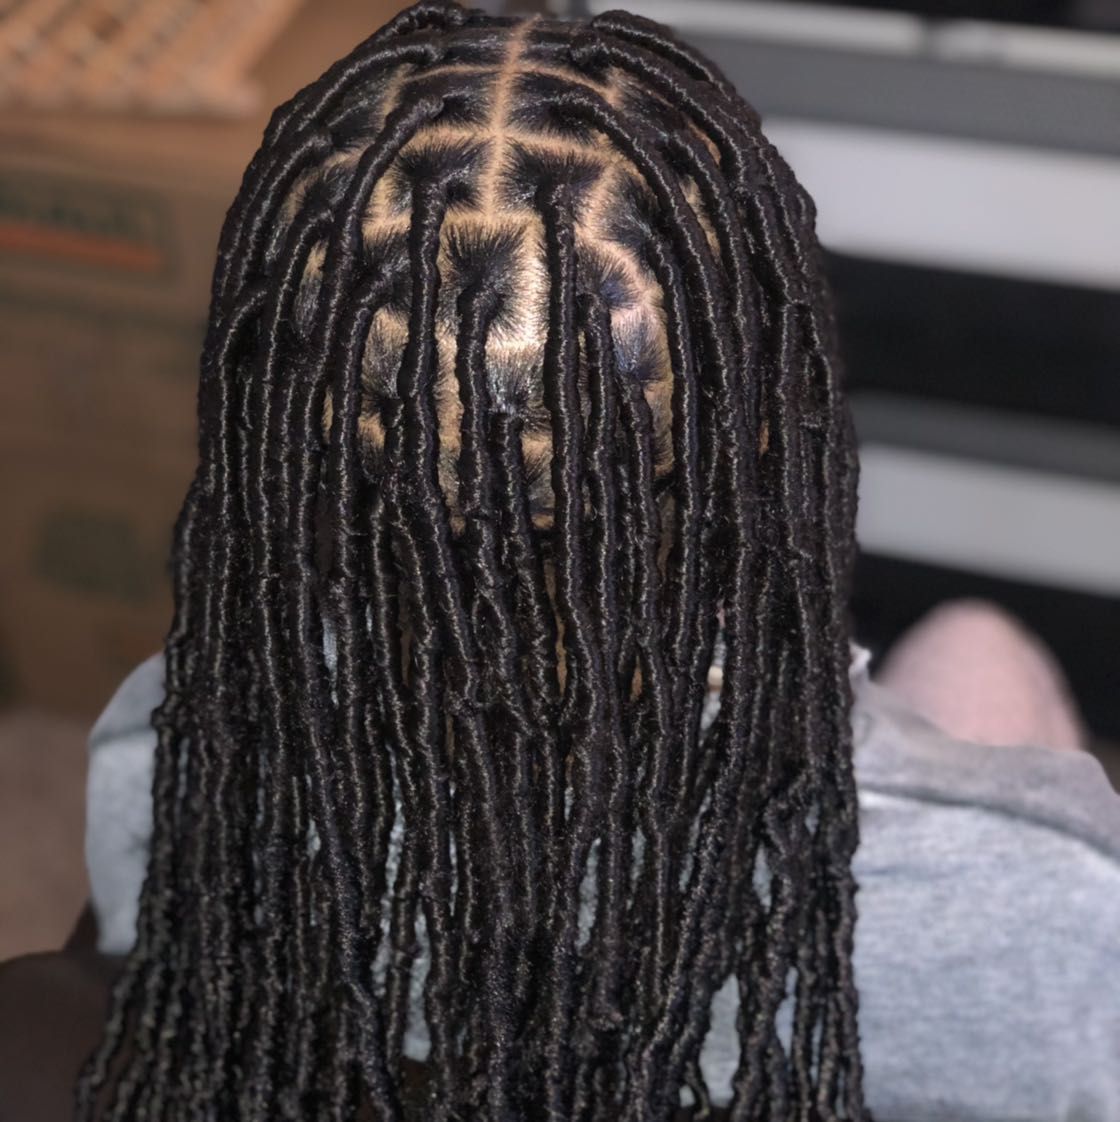 Soft/faux locs hair not included portfolio